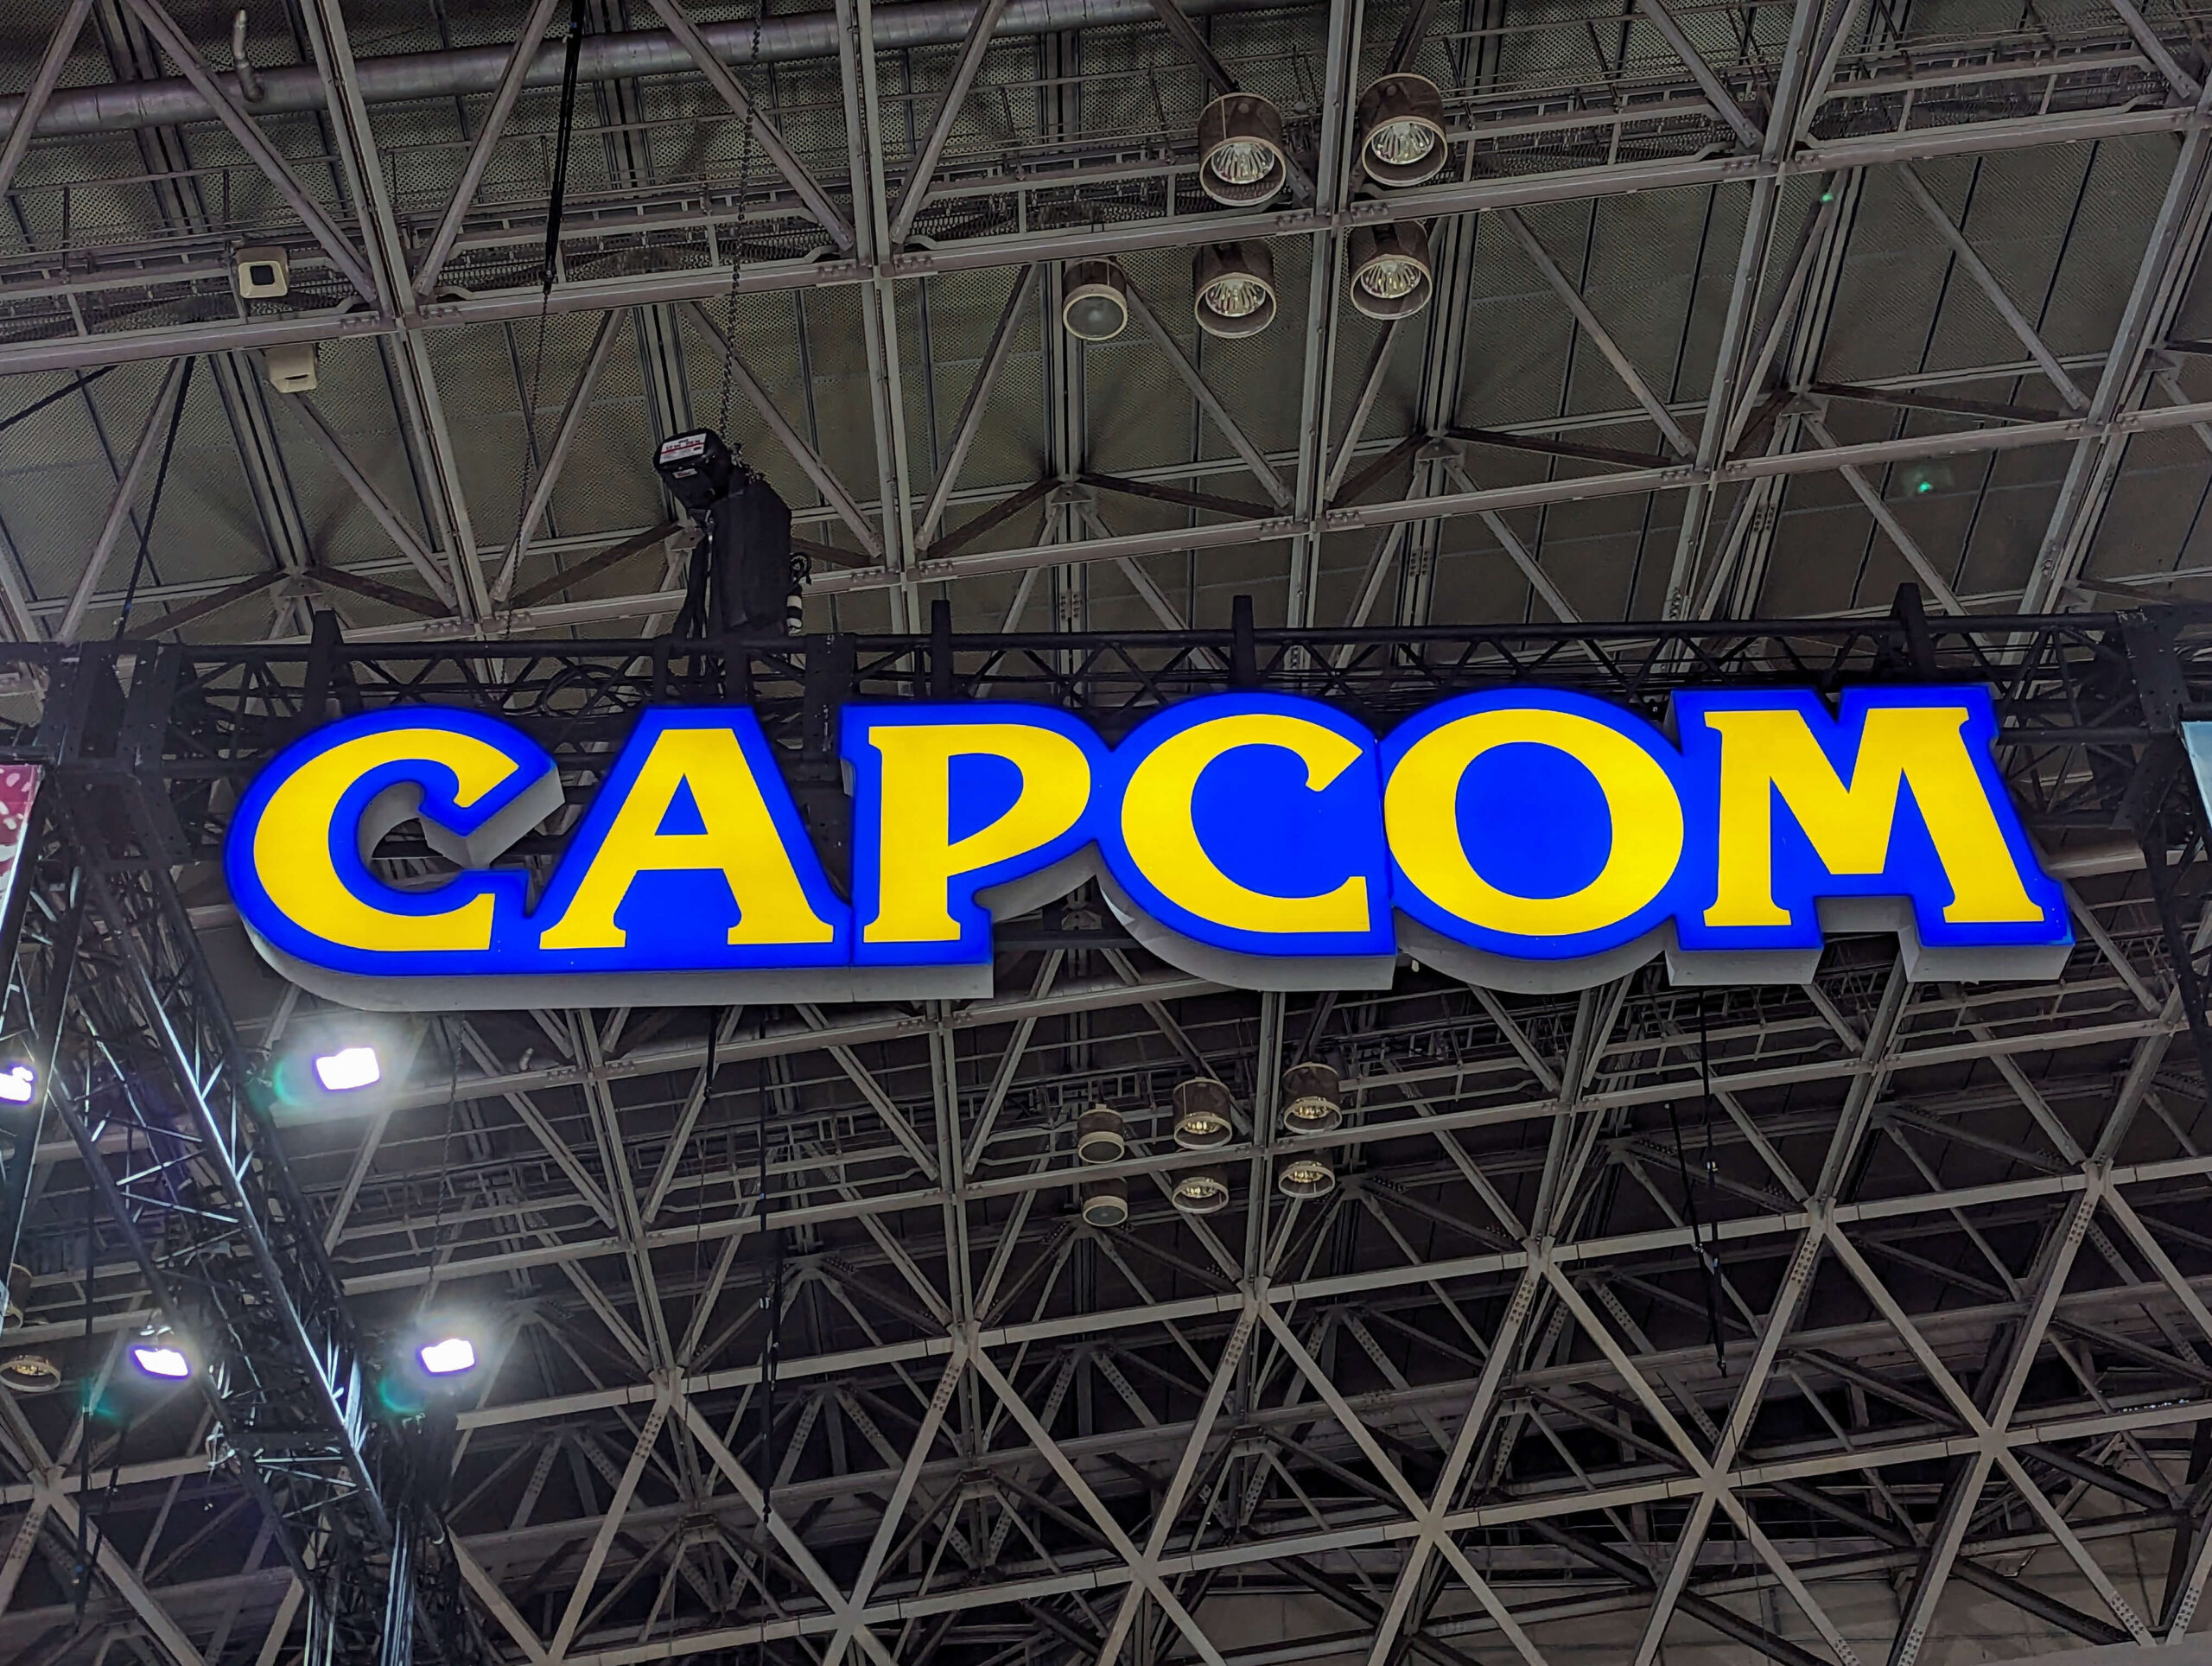 “Capcom’s Stock Soars as ‘Monster Hunter’ Mobile Launch Boosts Shares by 6%”